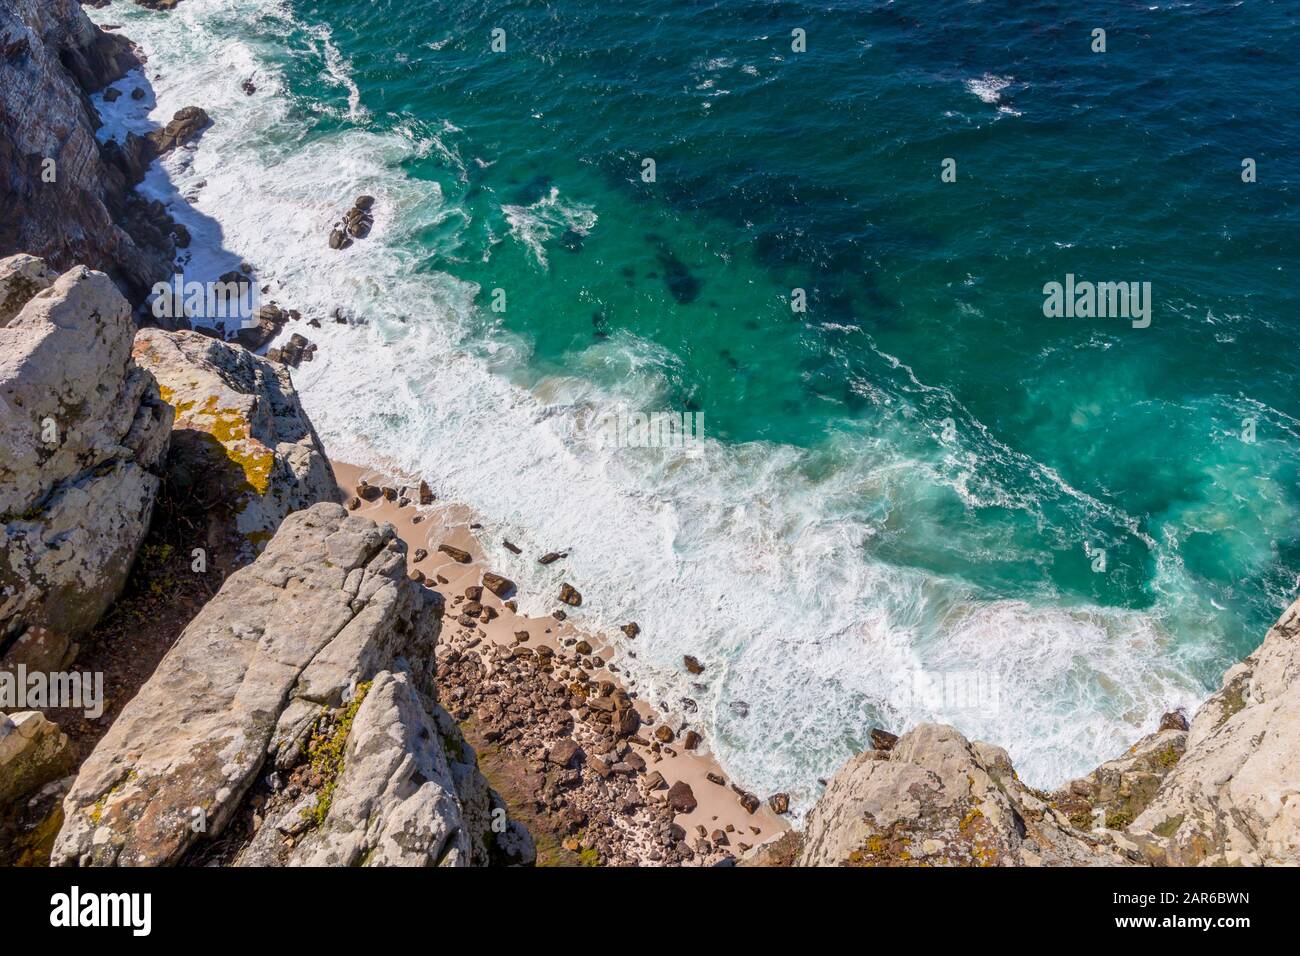 View over the cliffs at the deep ocean and waves swirling at small beach and rocks at Cape Point near Cape Town South Africa Stock Photo